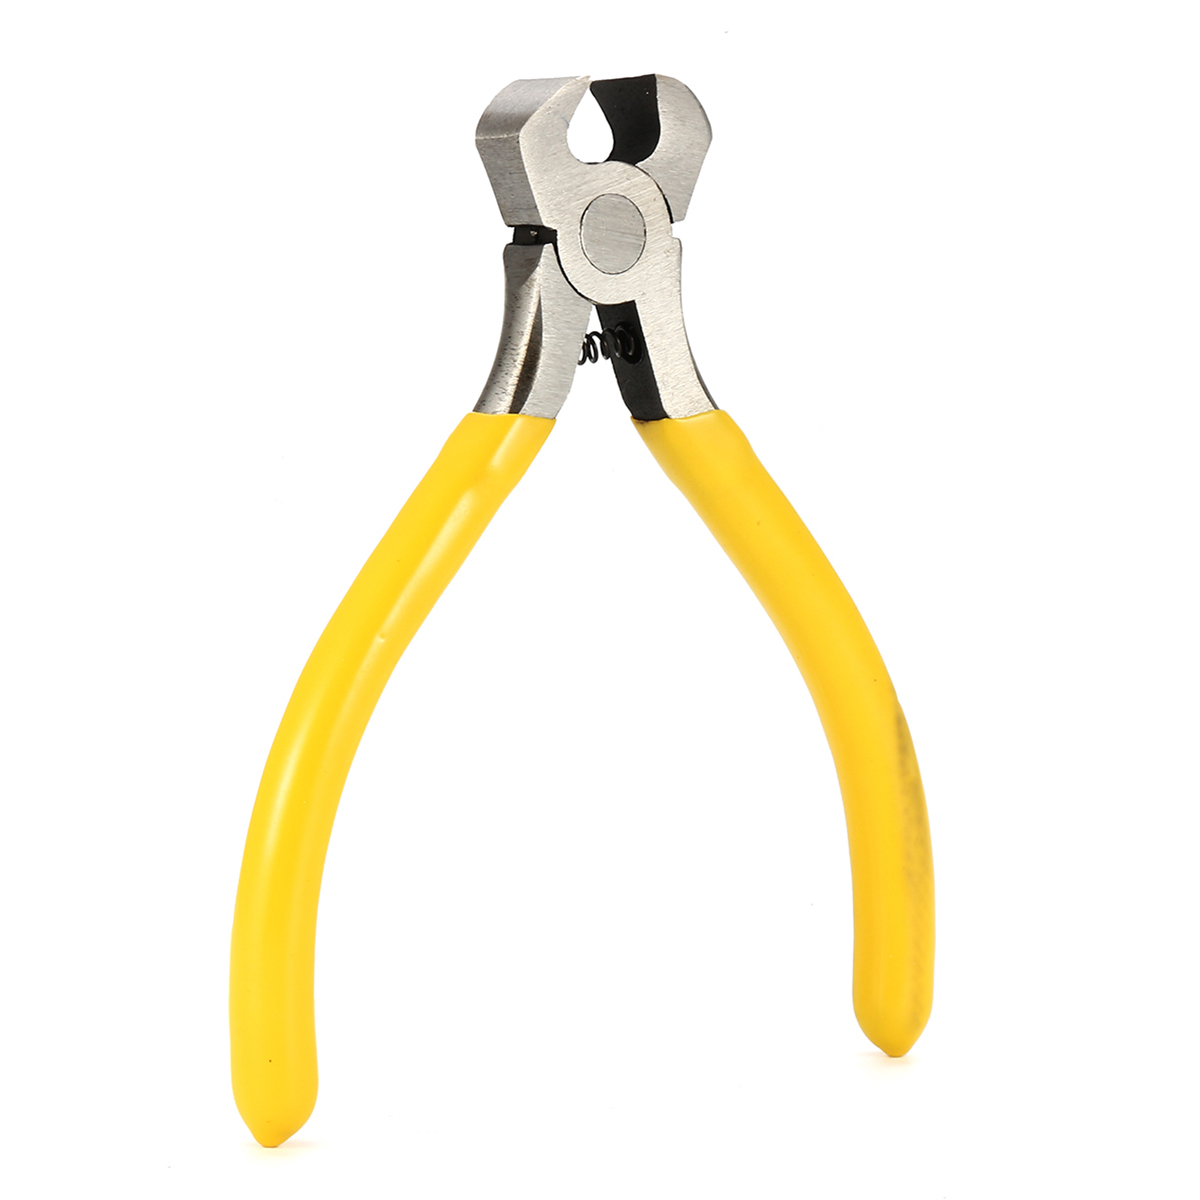 Guitar-Parts-Professional-Fret-Puller-Removal-Plier-Guitar-Bass-Repair-Tool-String-Pliers-Tool-1368383-2